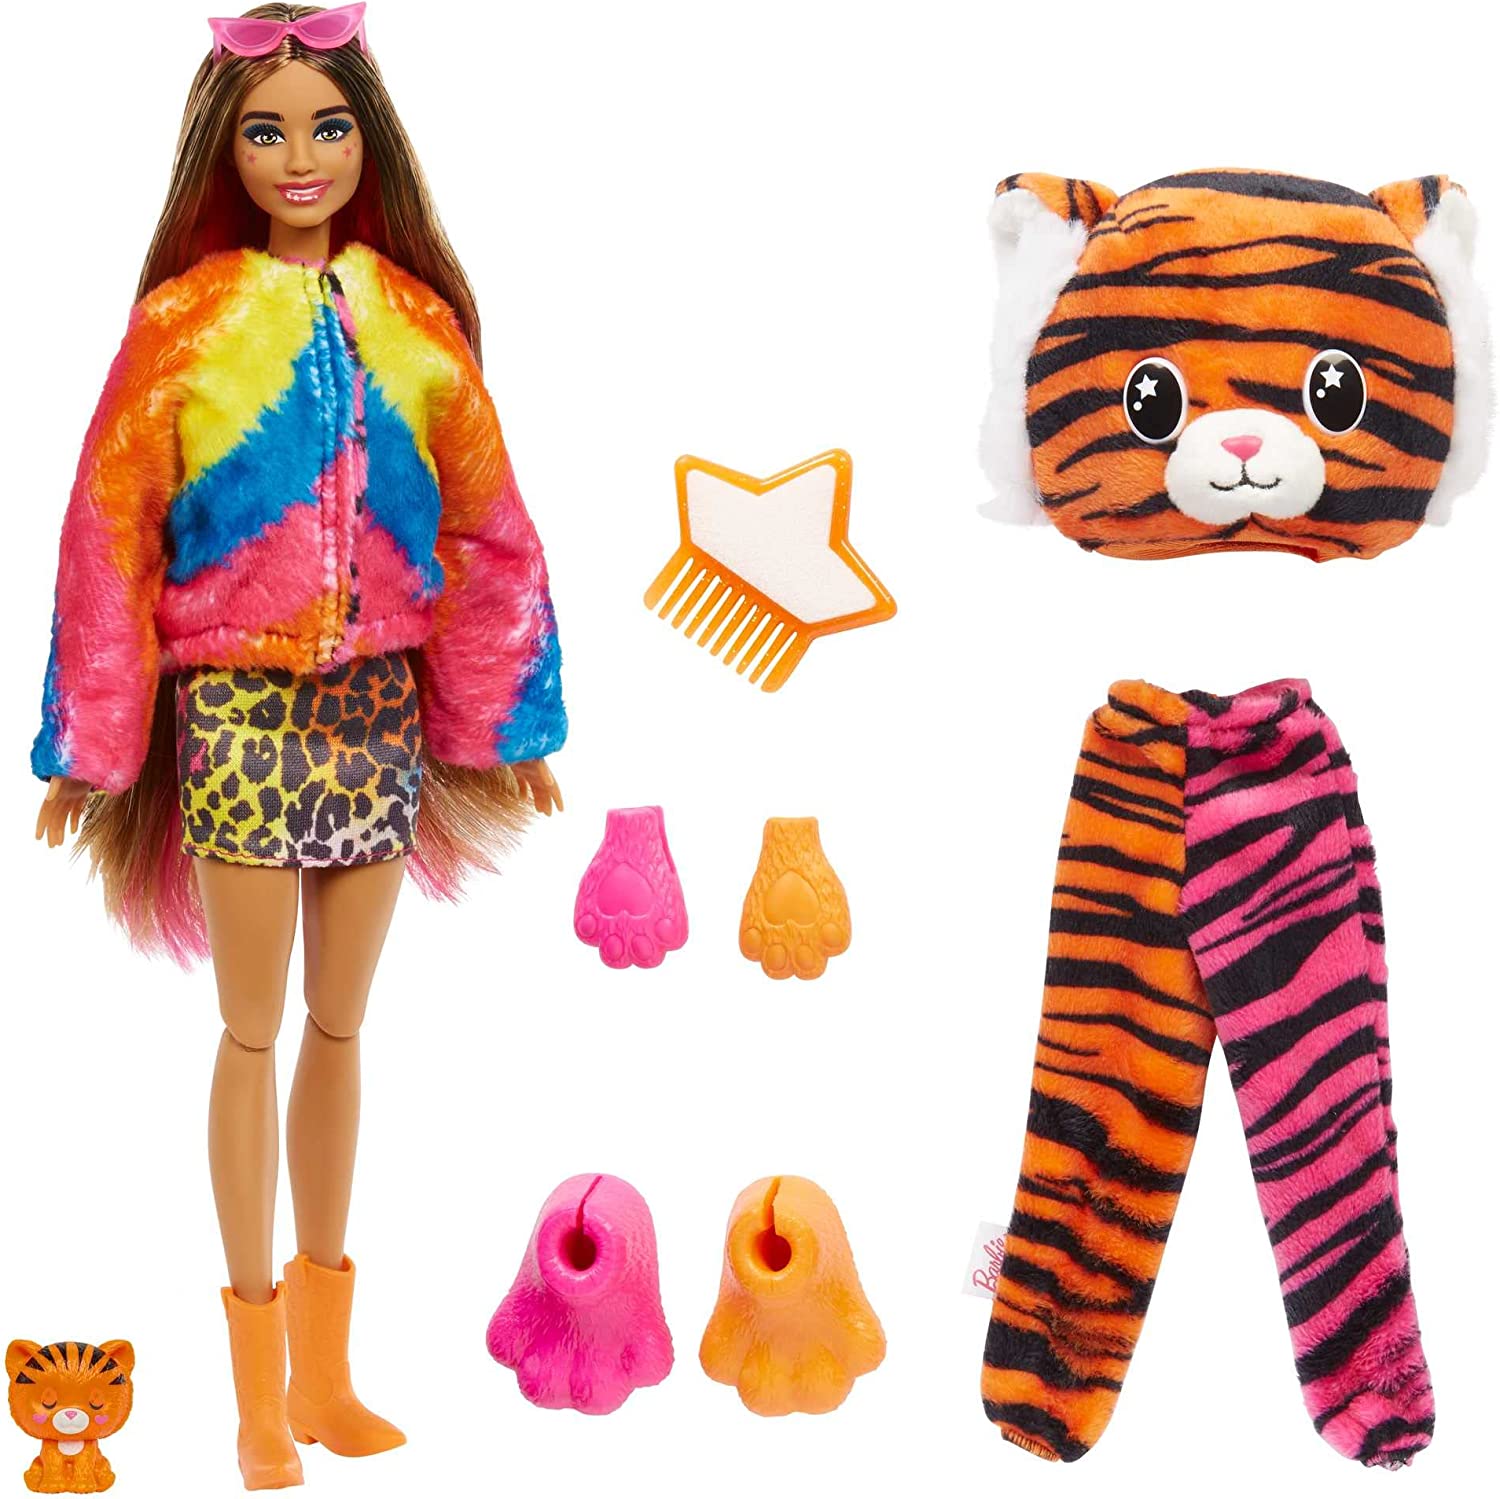 Barbie Dolls and Accessories, Cutie Reveal Doll with Tiger Plush Costume & 10 Surprises Including Color Change, Jungle Series, Cutie Reveal Doll with Monkey Plush Costume, Barbie Dolls and Accessories, Cutie Reveal Doll with Toucan Plush Costume & 10 Surprises Including Color Change, Jungle Series, official licensed barbie toy, barbie's iconic home, make your own, barbie doll, spencer doll, chelsey doll, barbie, skipper, barbie beach, barbie beach house, barbie beach house, barbie beach bungalow, barbie bea